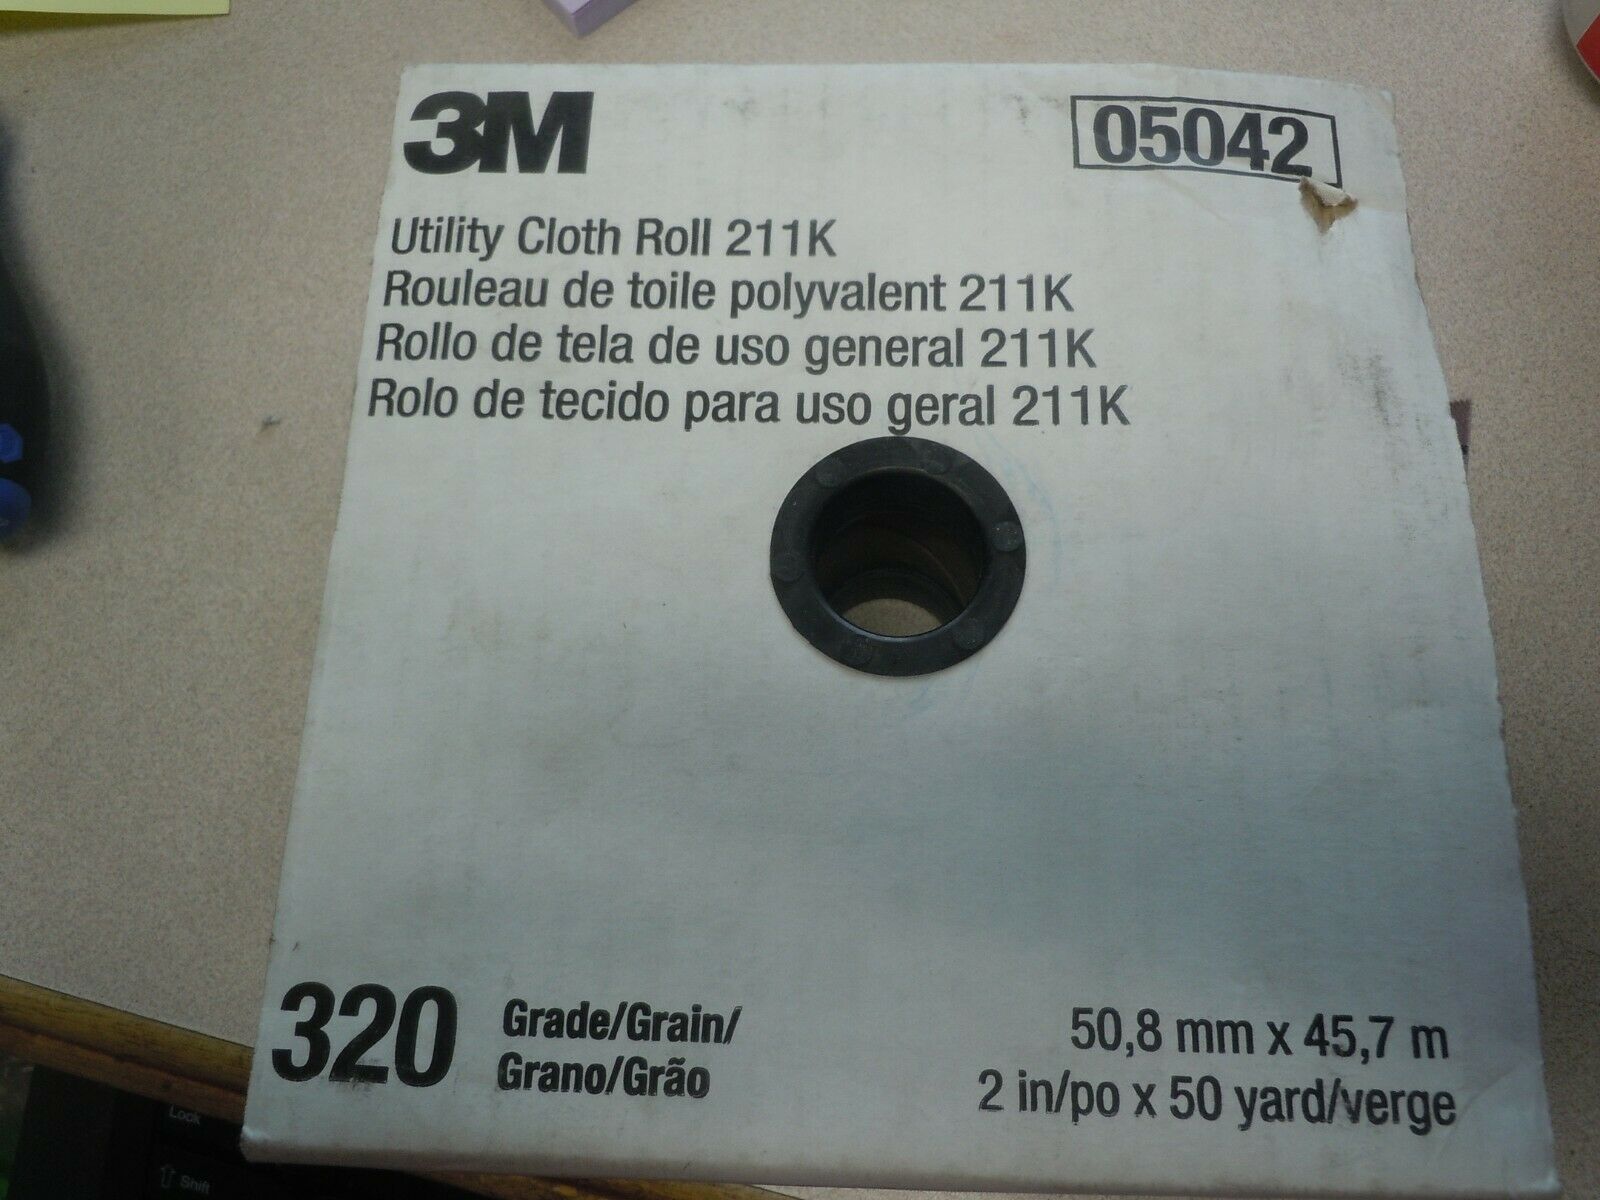 3m 05042 Abrasive Roll Utility Cloth Roll 211k 320 Grit 2" X 150ft - New In Box